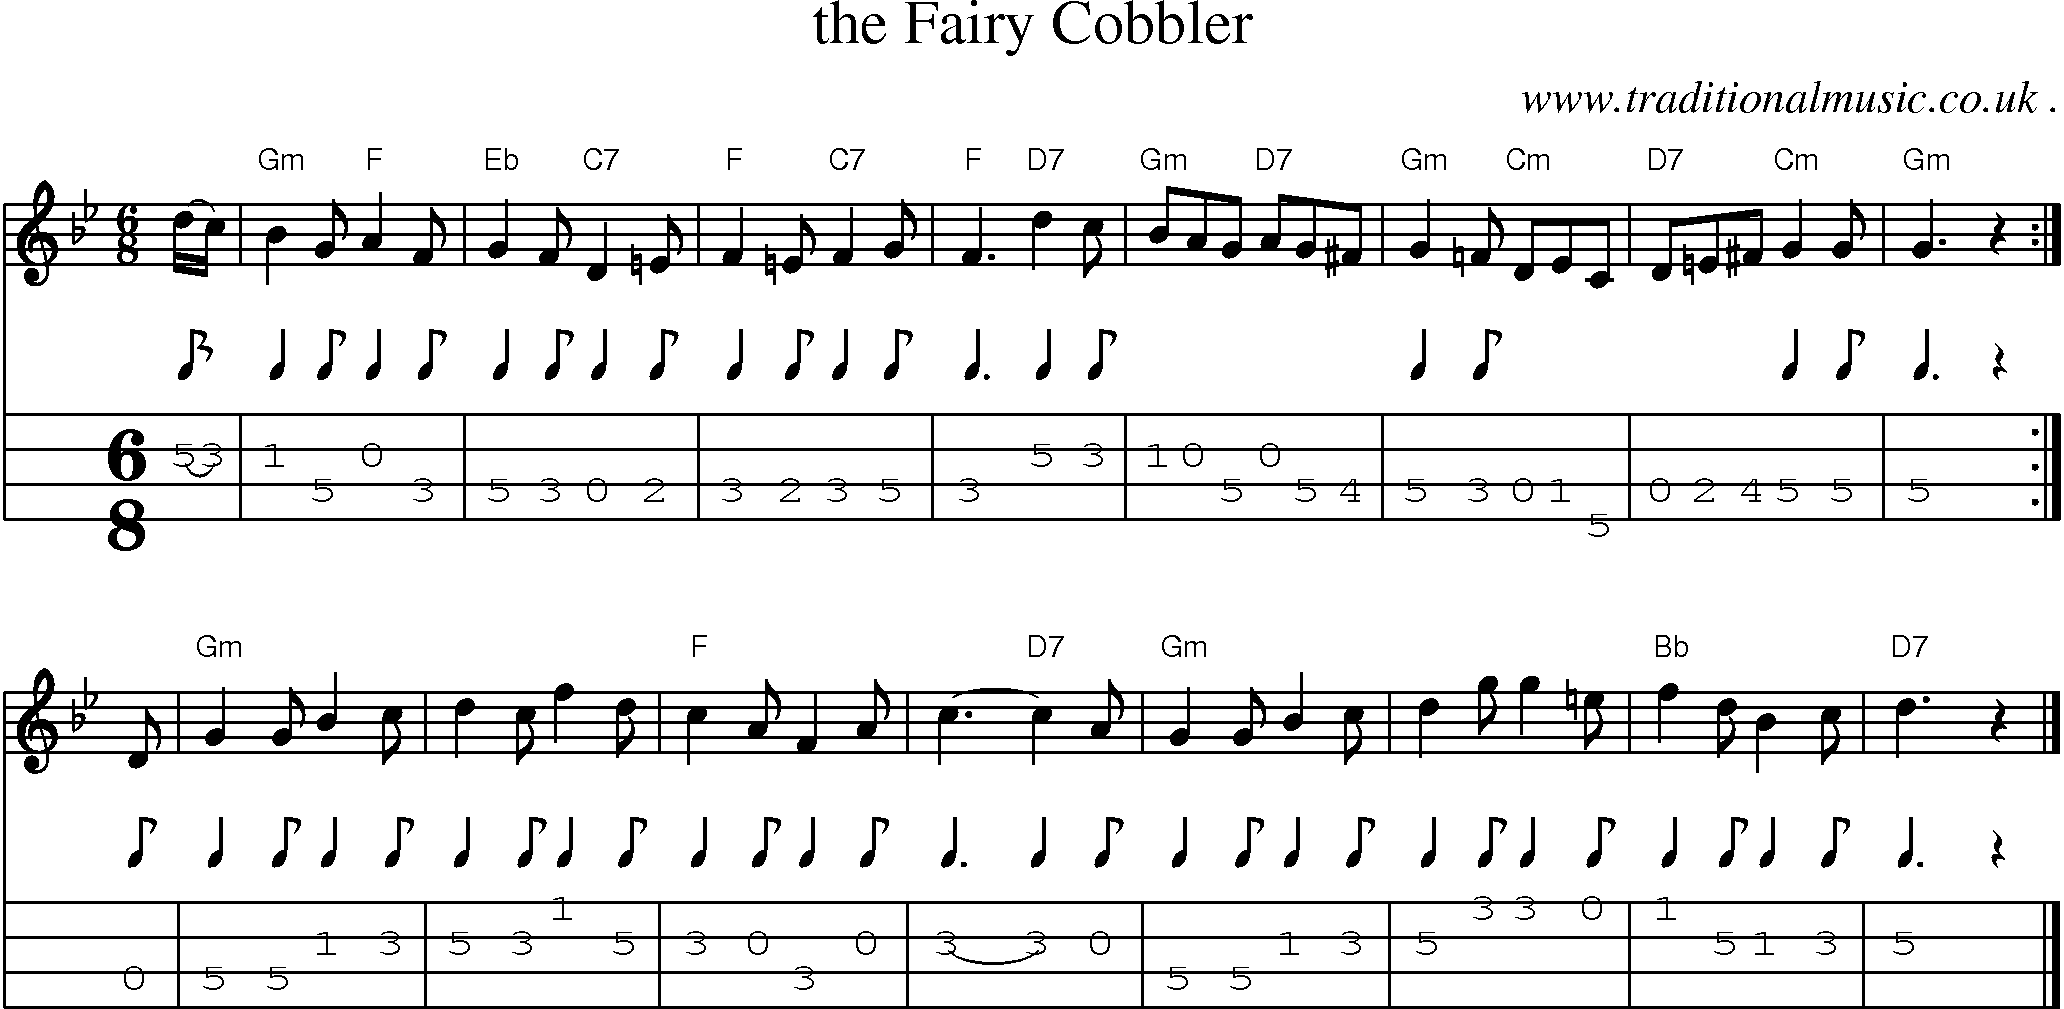 Sheet-music  score, Chords and Mandolin Tabs for The Fairy Cobbler